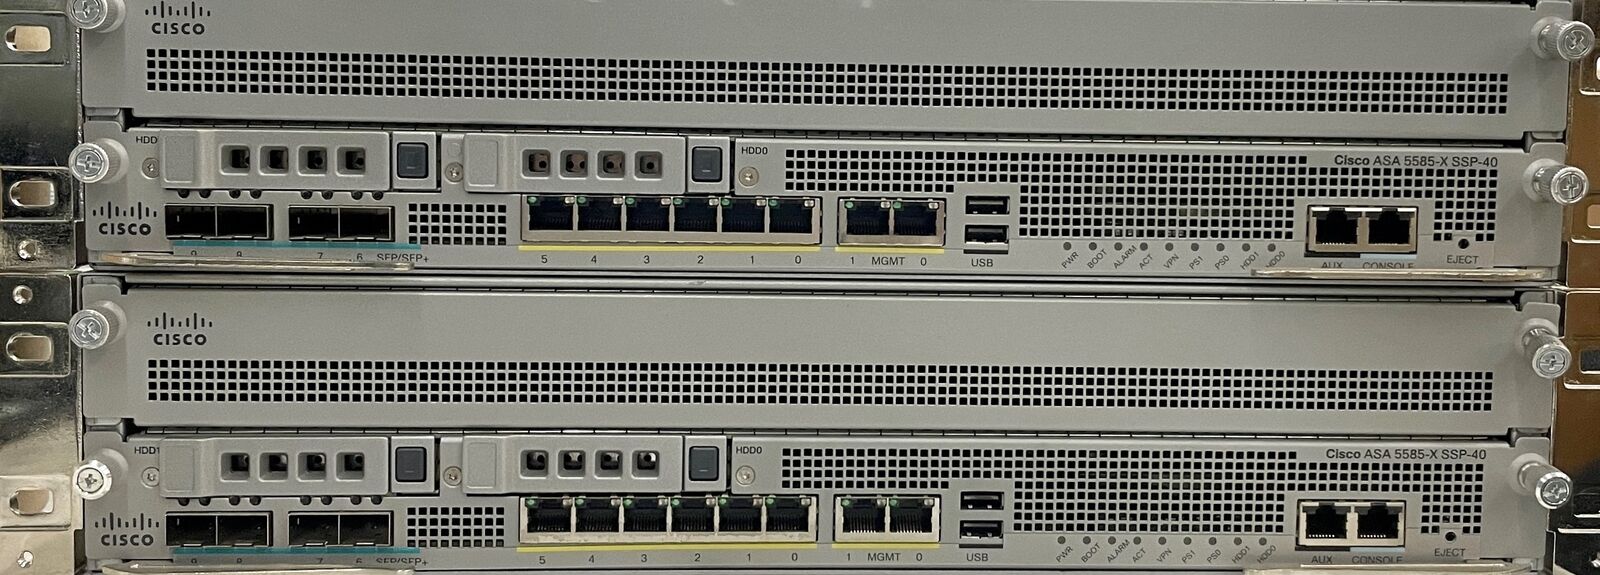 Cisco ASA 5585-X FireWall Chassis with SSP-40 MODULE and 1200W DUAL PWR